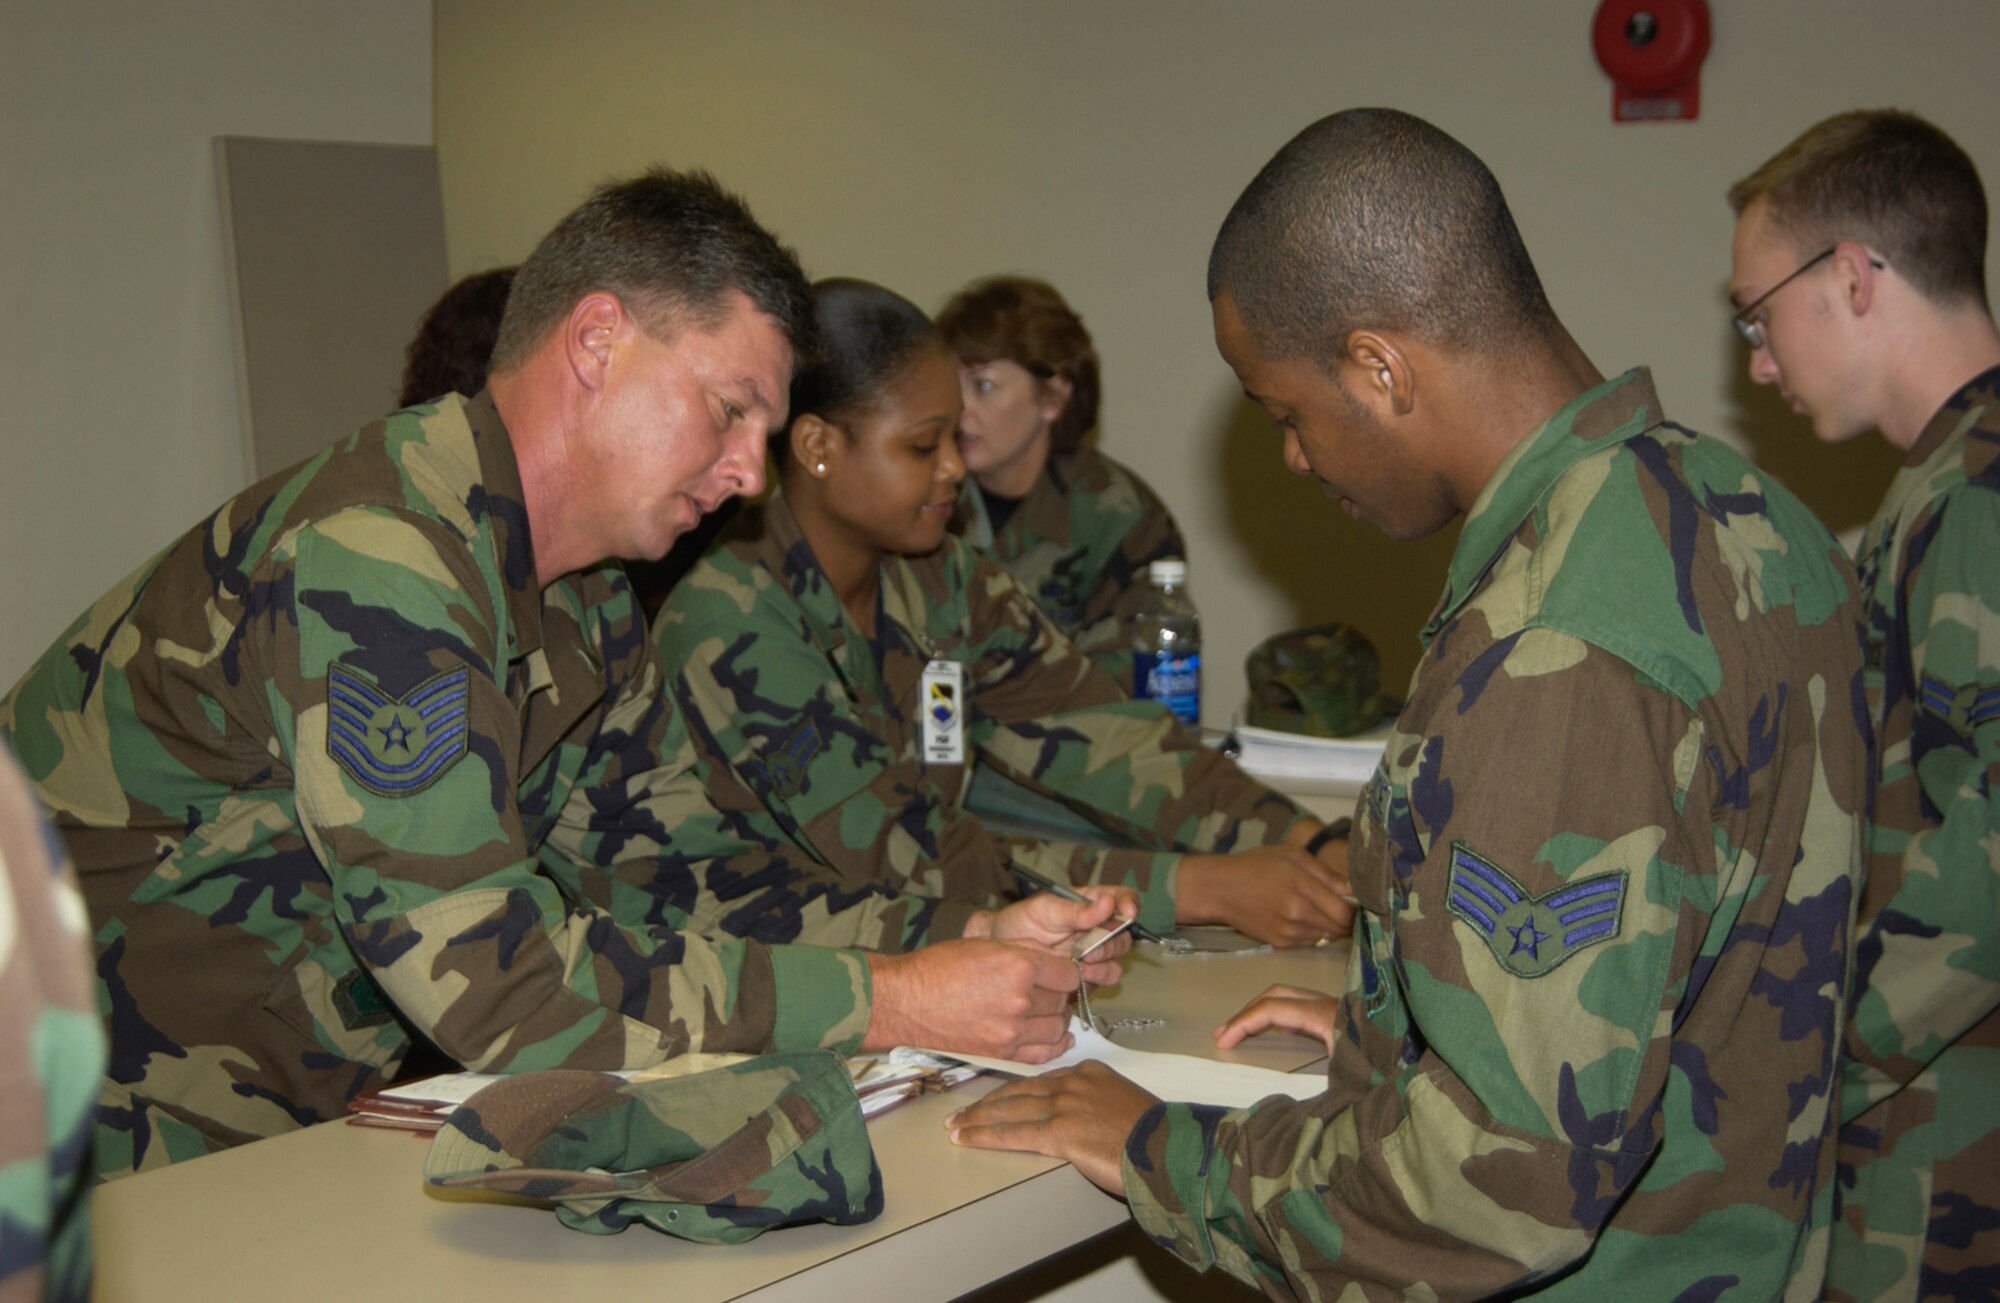 Tech. Sgt. David Wilder, 325th Mission Support Squadron base training manager, reviews an Airman’s training folder in a mass deployment line during the Operational Readiness Inspection in 2005.

